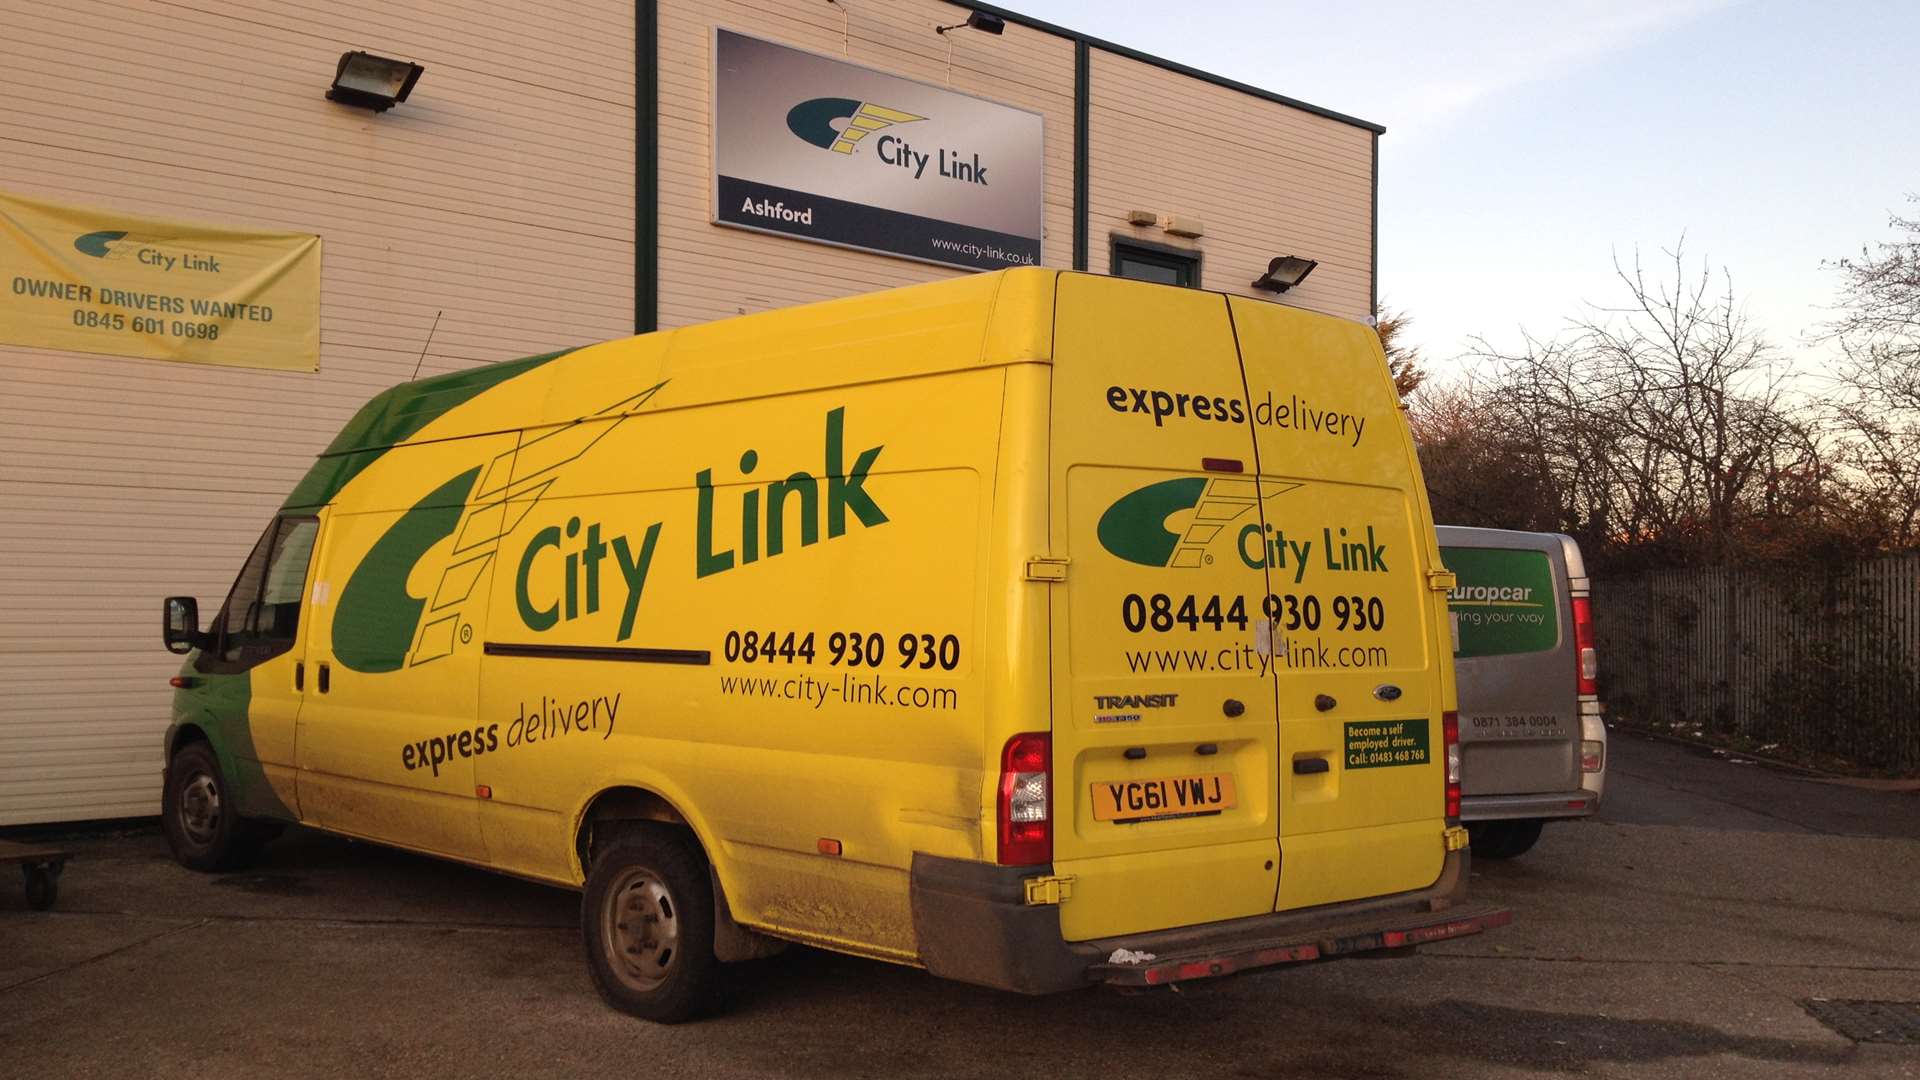 The City Link depot on the Kingsnorth Industrial Estate, Ashford